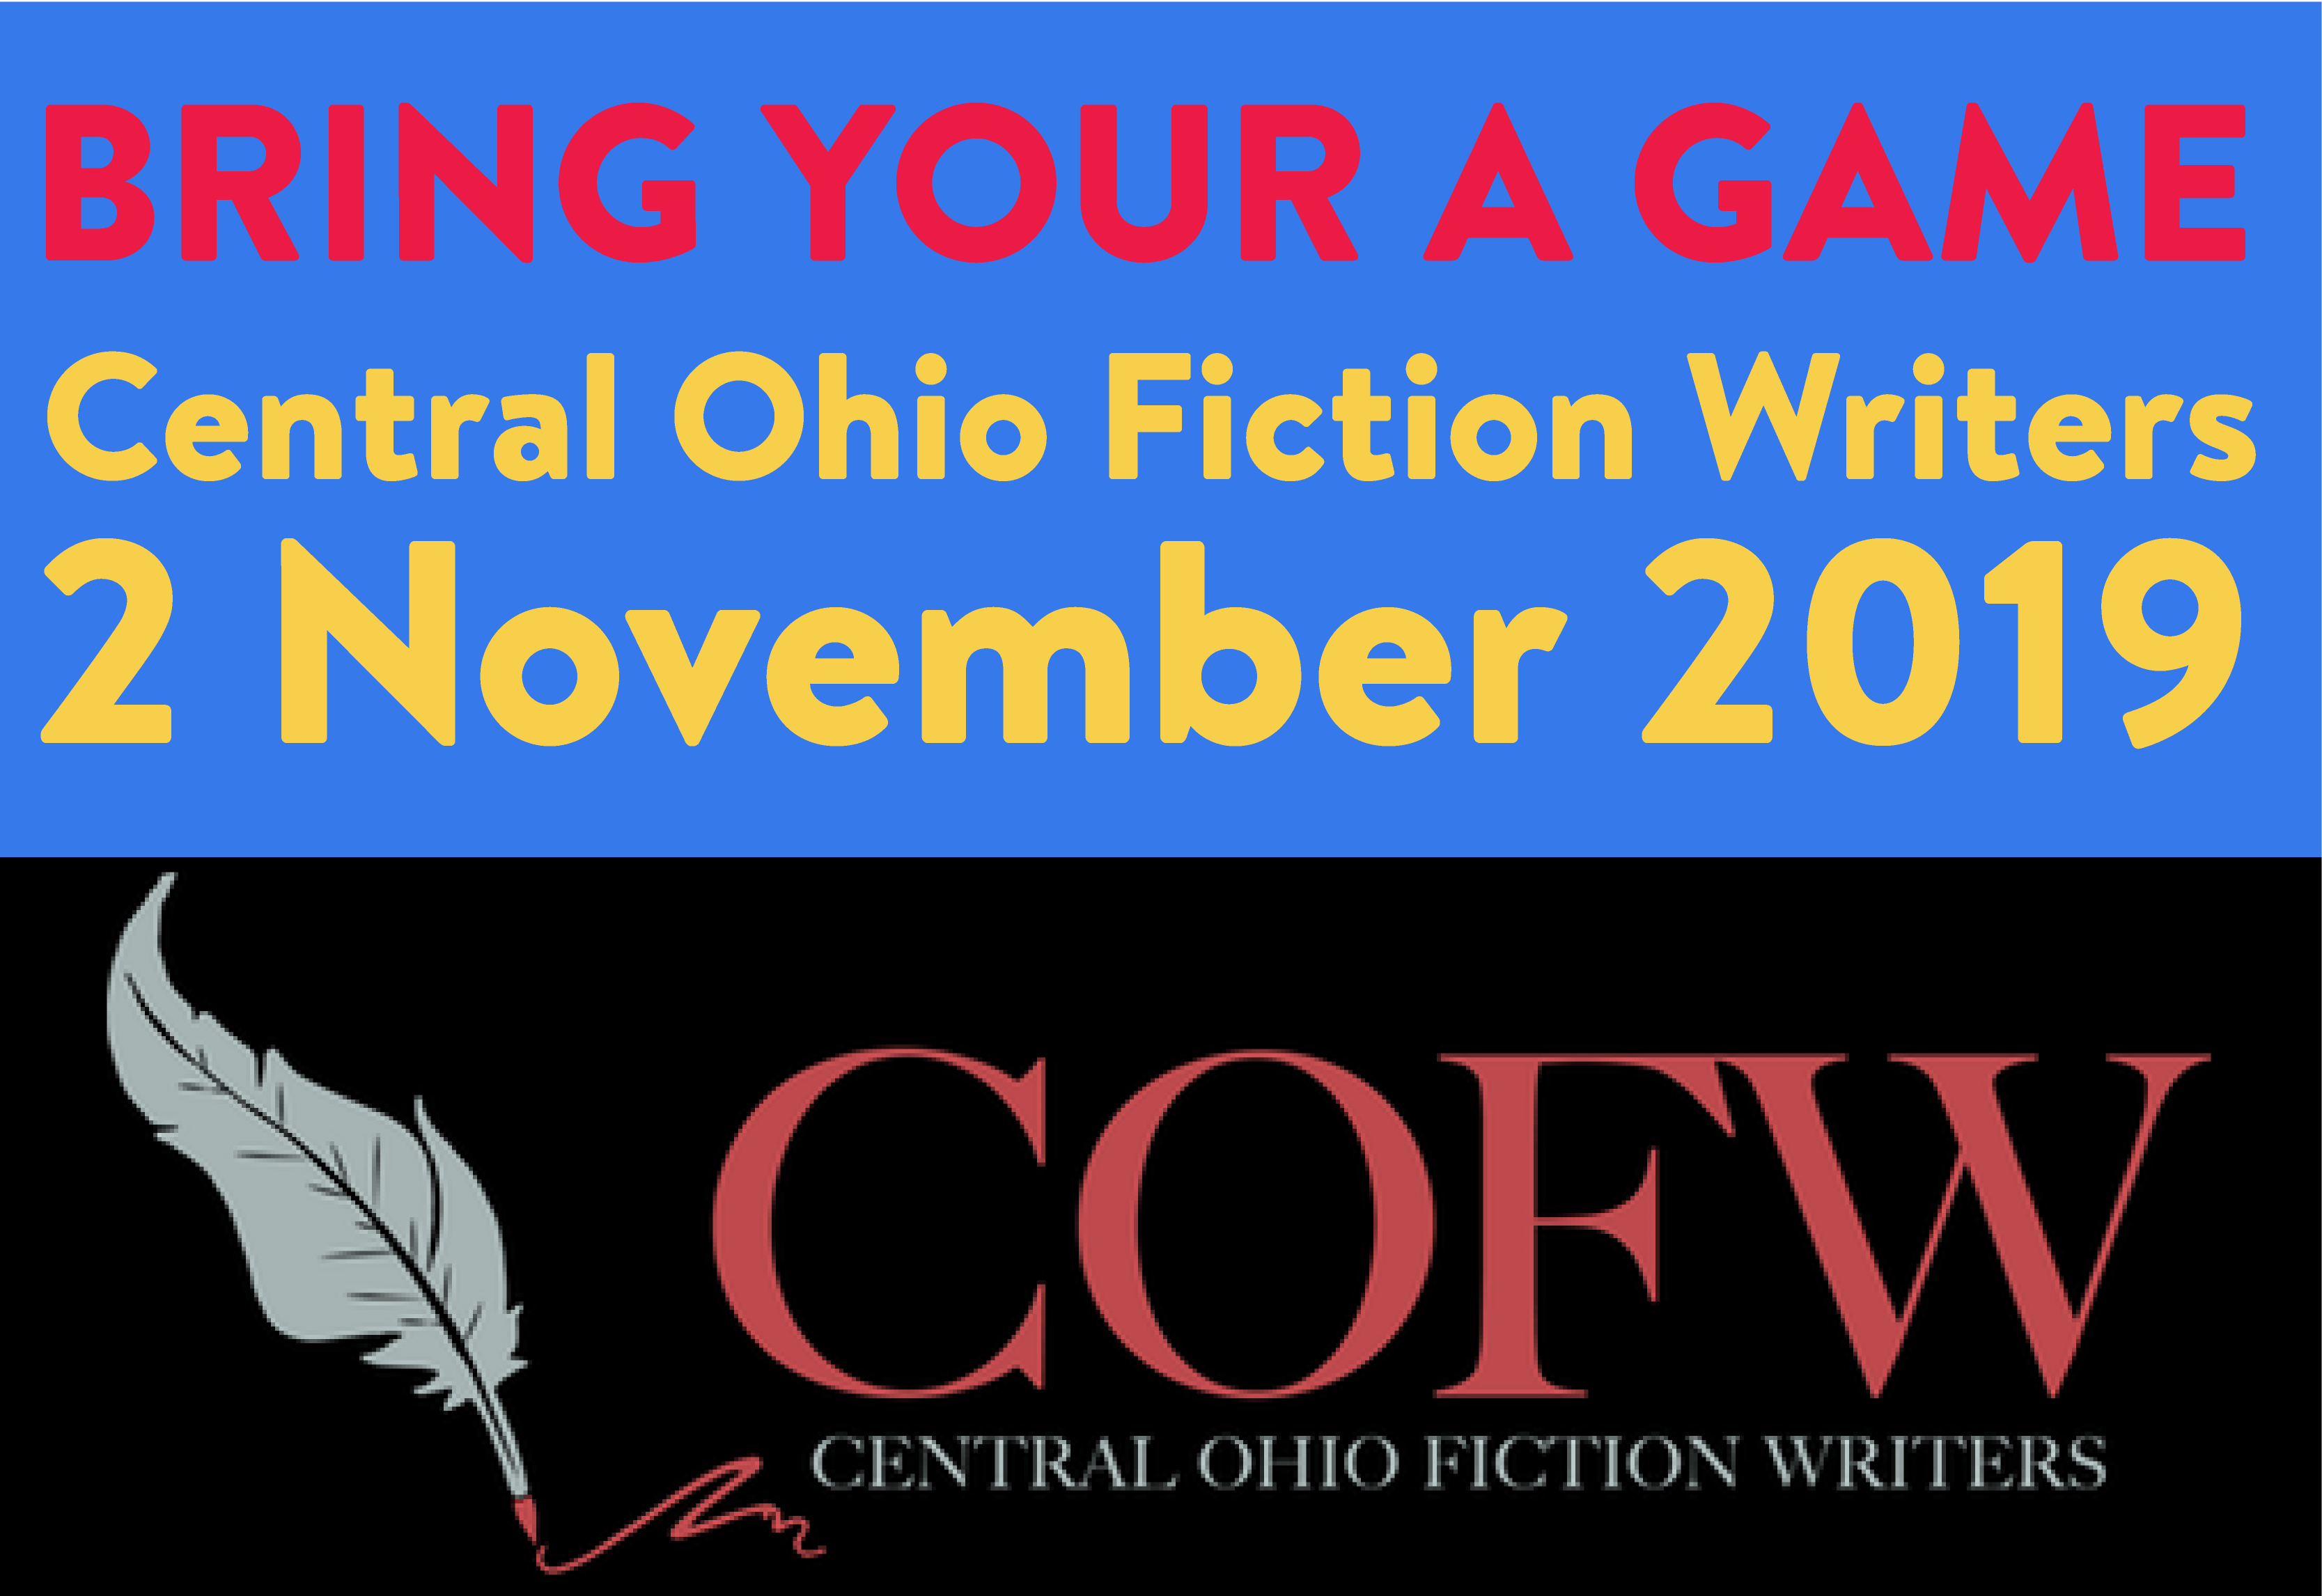 Central Ohio Fiction Writers (Columbus, OH)